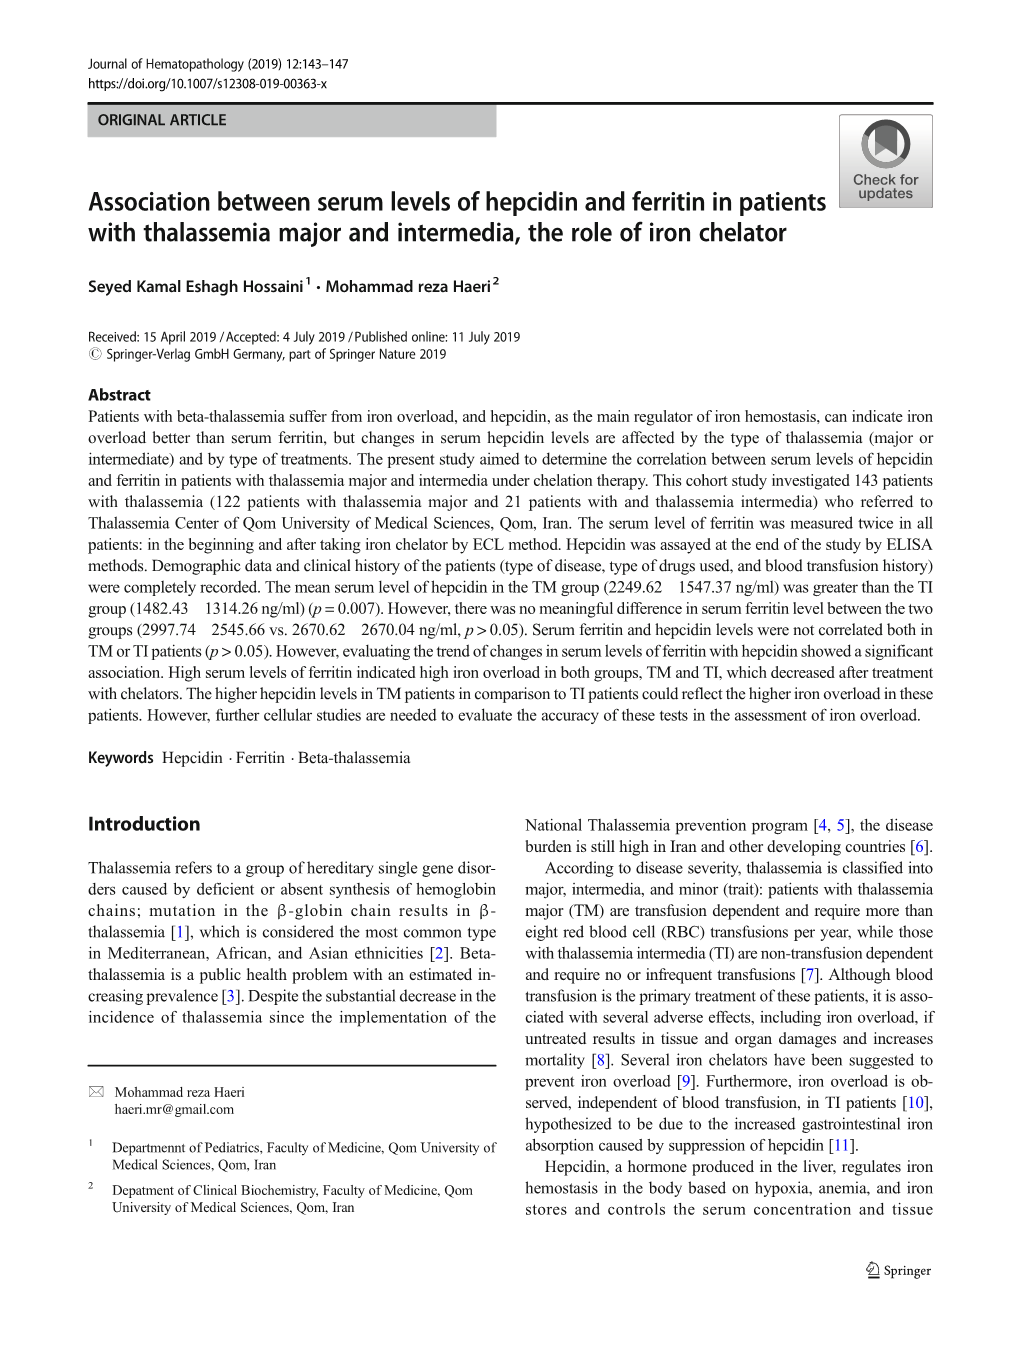 Association Between Serum Levels of Hepcidin and Ferritin in Patients with Thalassemia Major and Intermedia, the Role of Iron Chelator